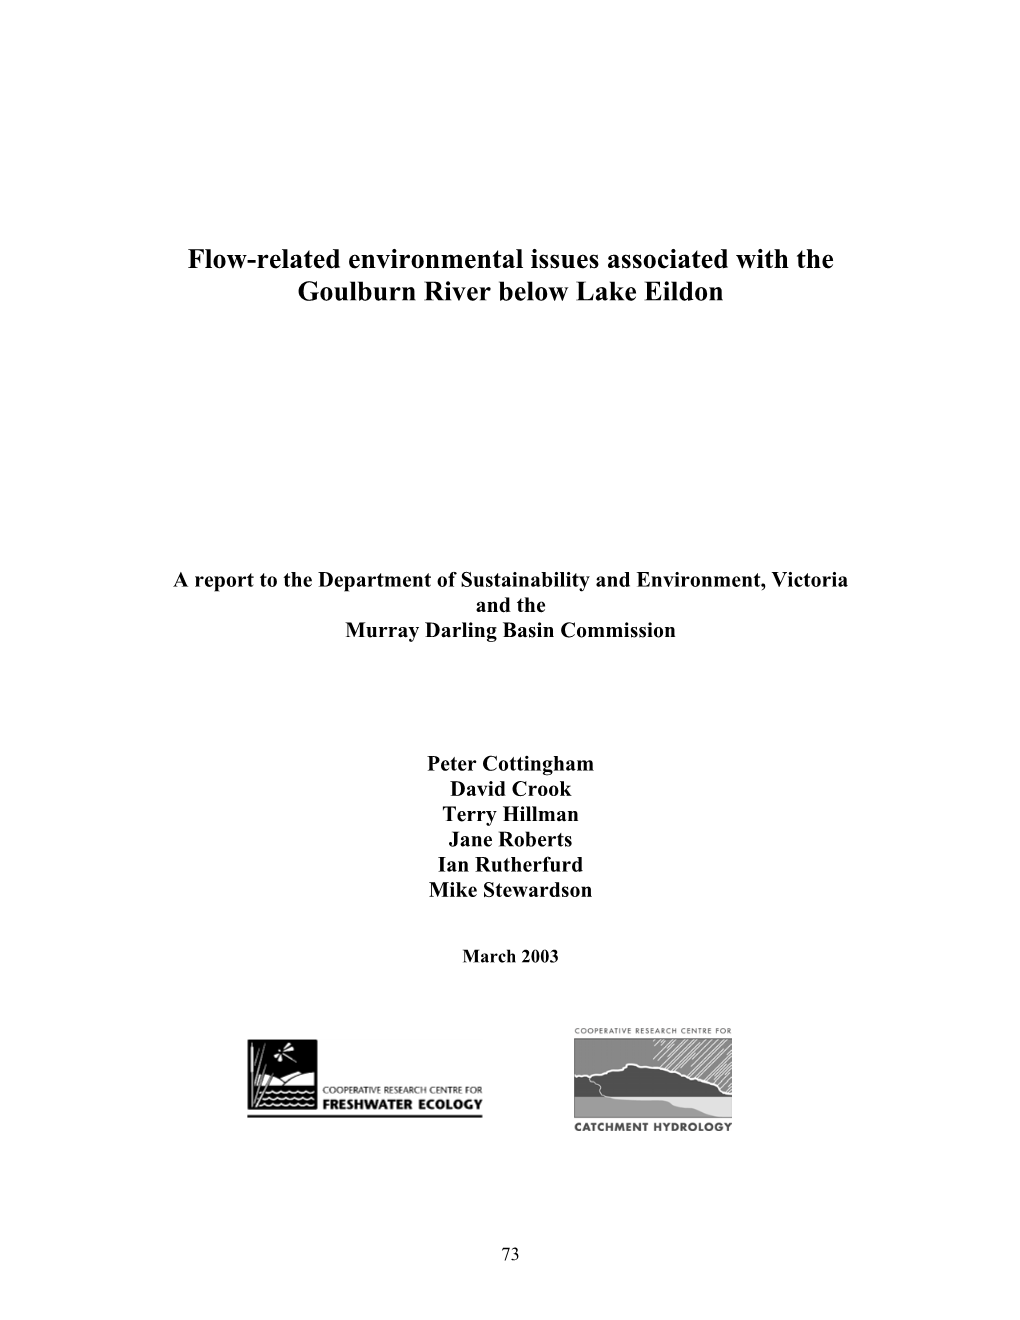 Flow-Related Environmental Issues Associated with the Goulburn River Below Lake Eildon